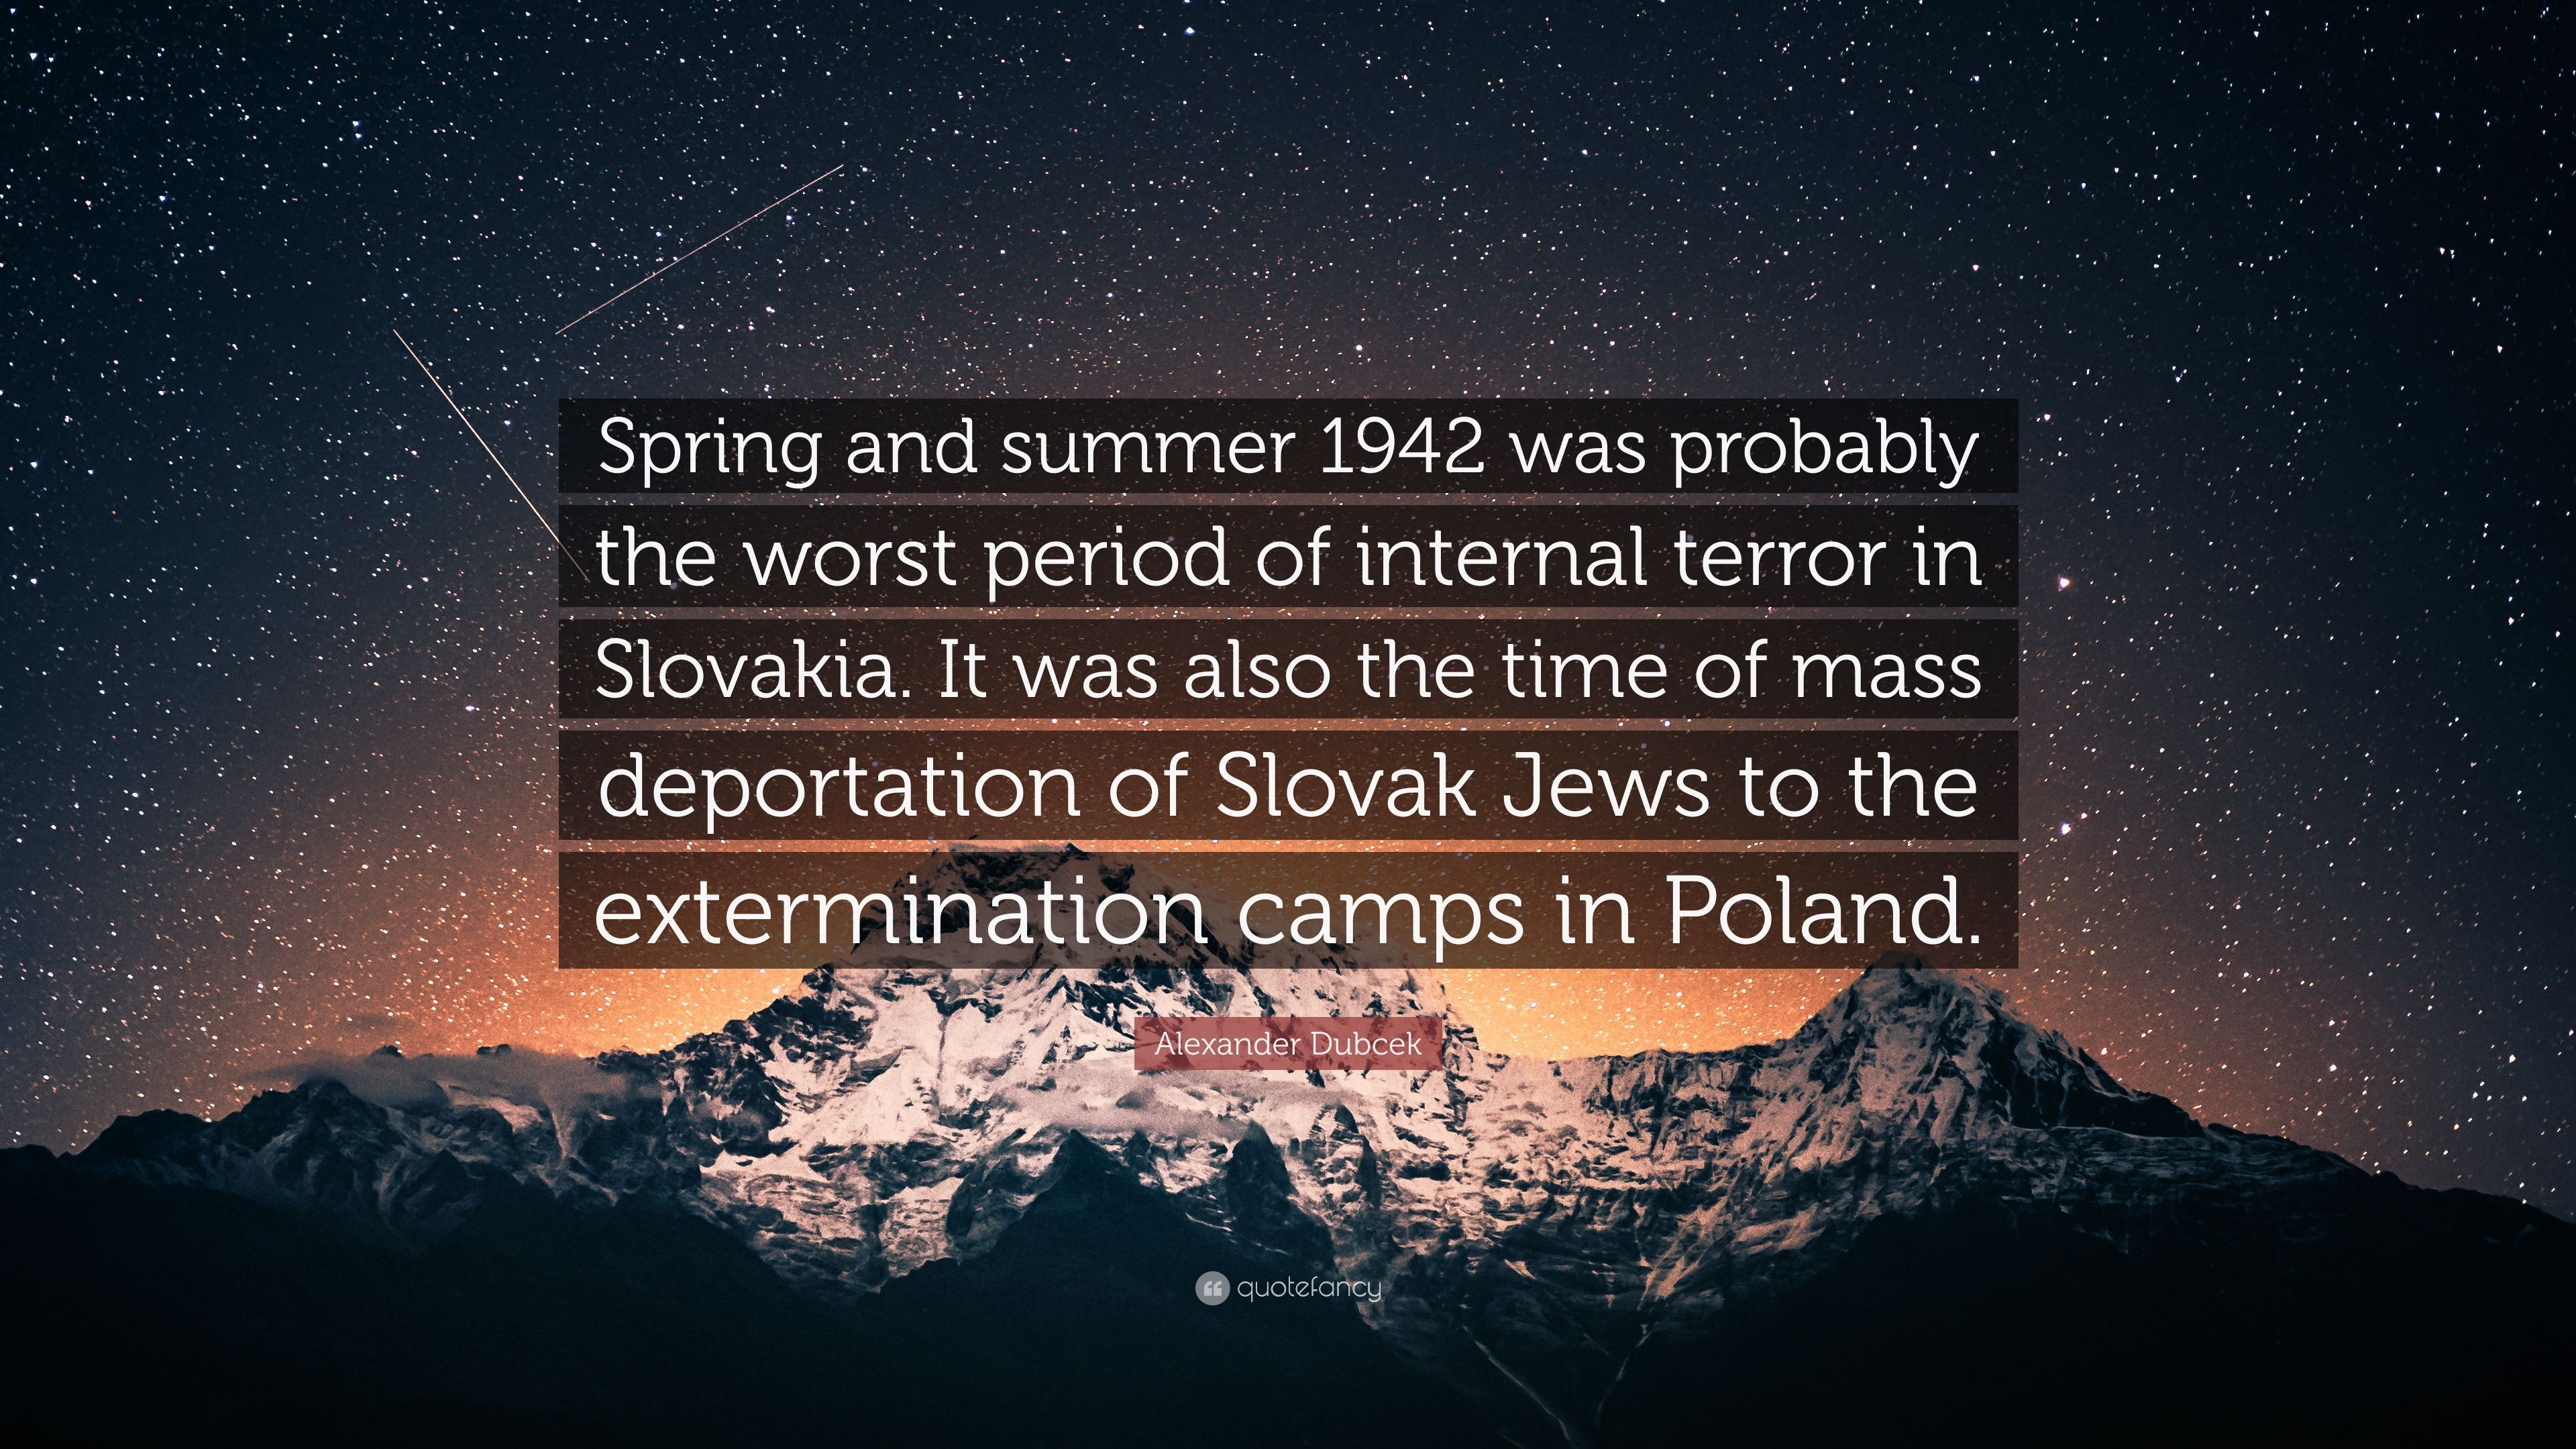 Alexander Dubcek Quote: “Spring and summer 1942 was probably